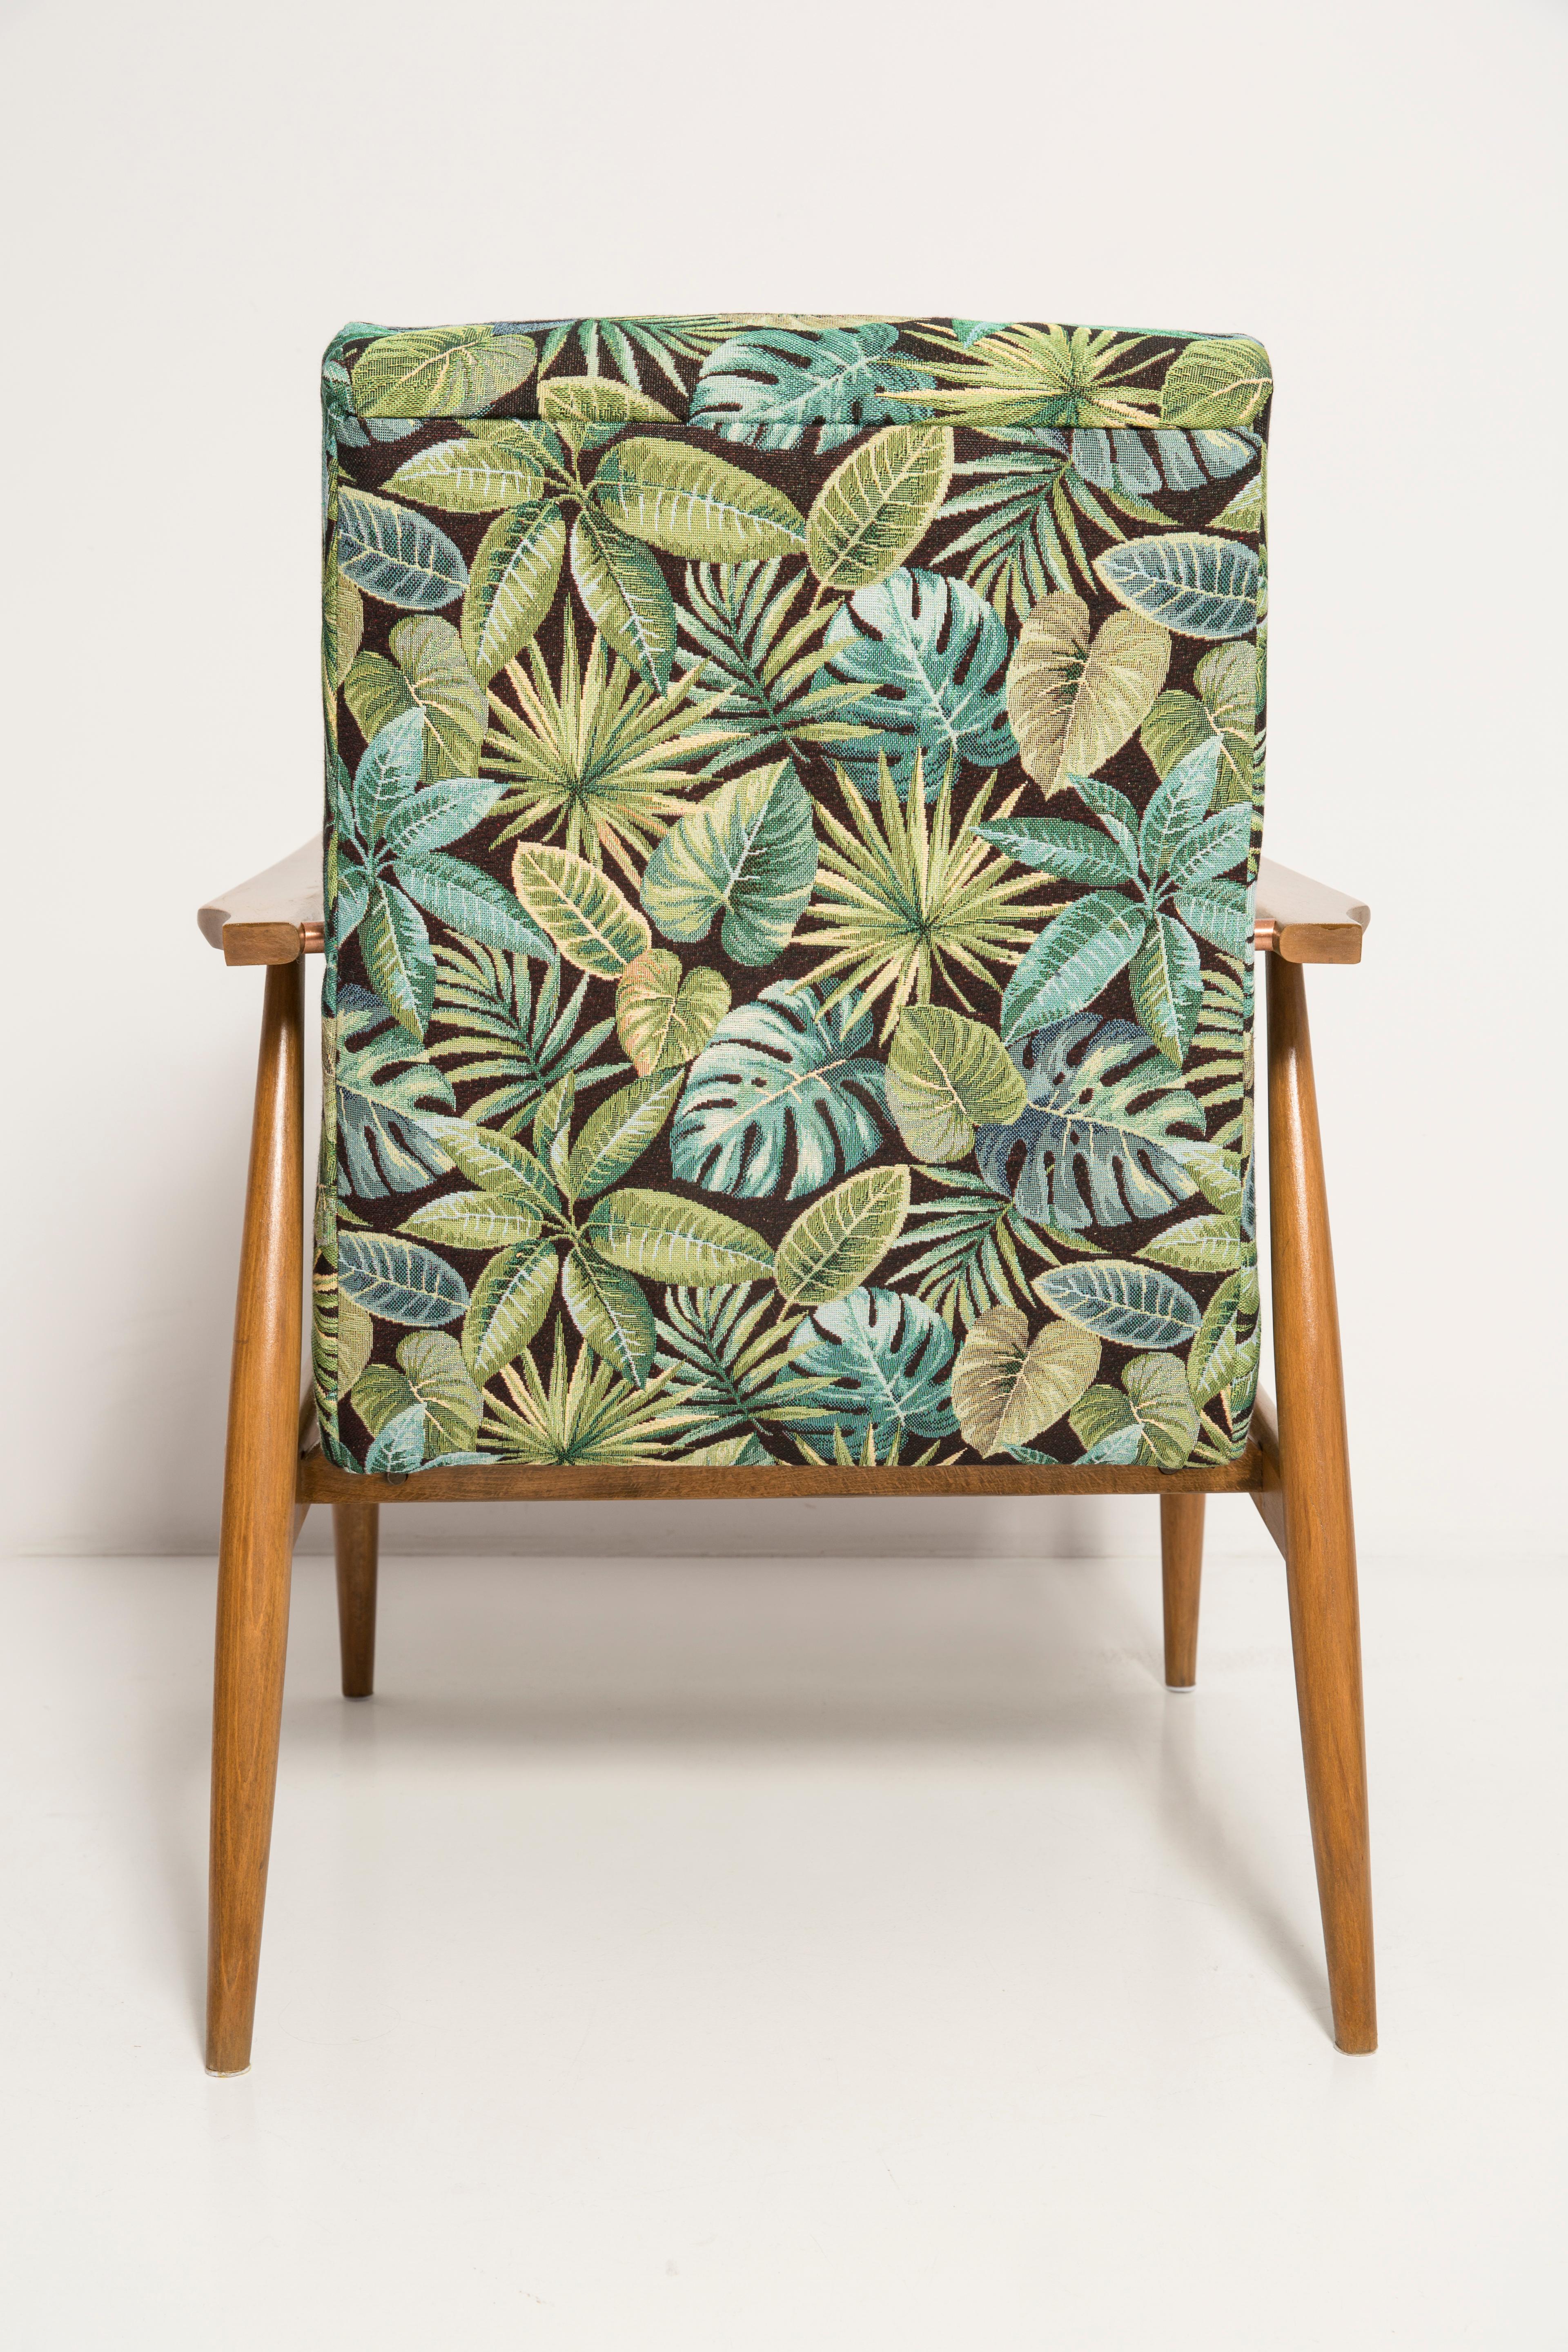 Mid-Century Green Leaves Jacquard Dante Armchair, H. Lis, 1960s For Sale 5